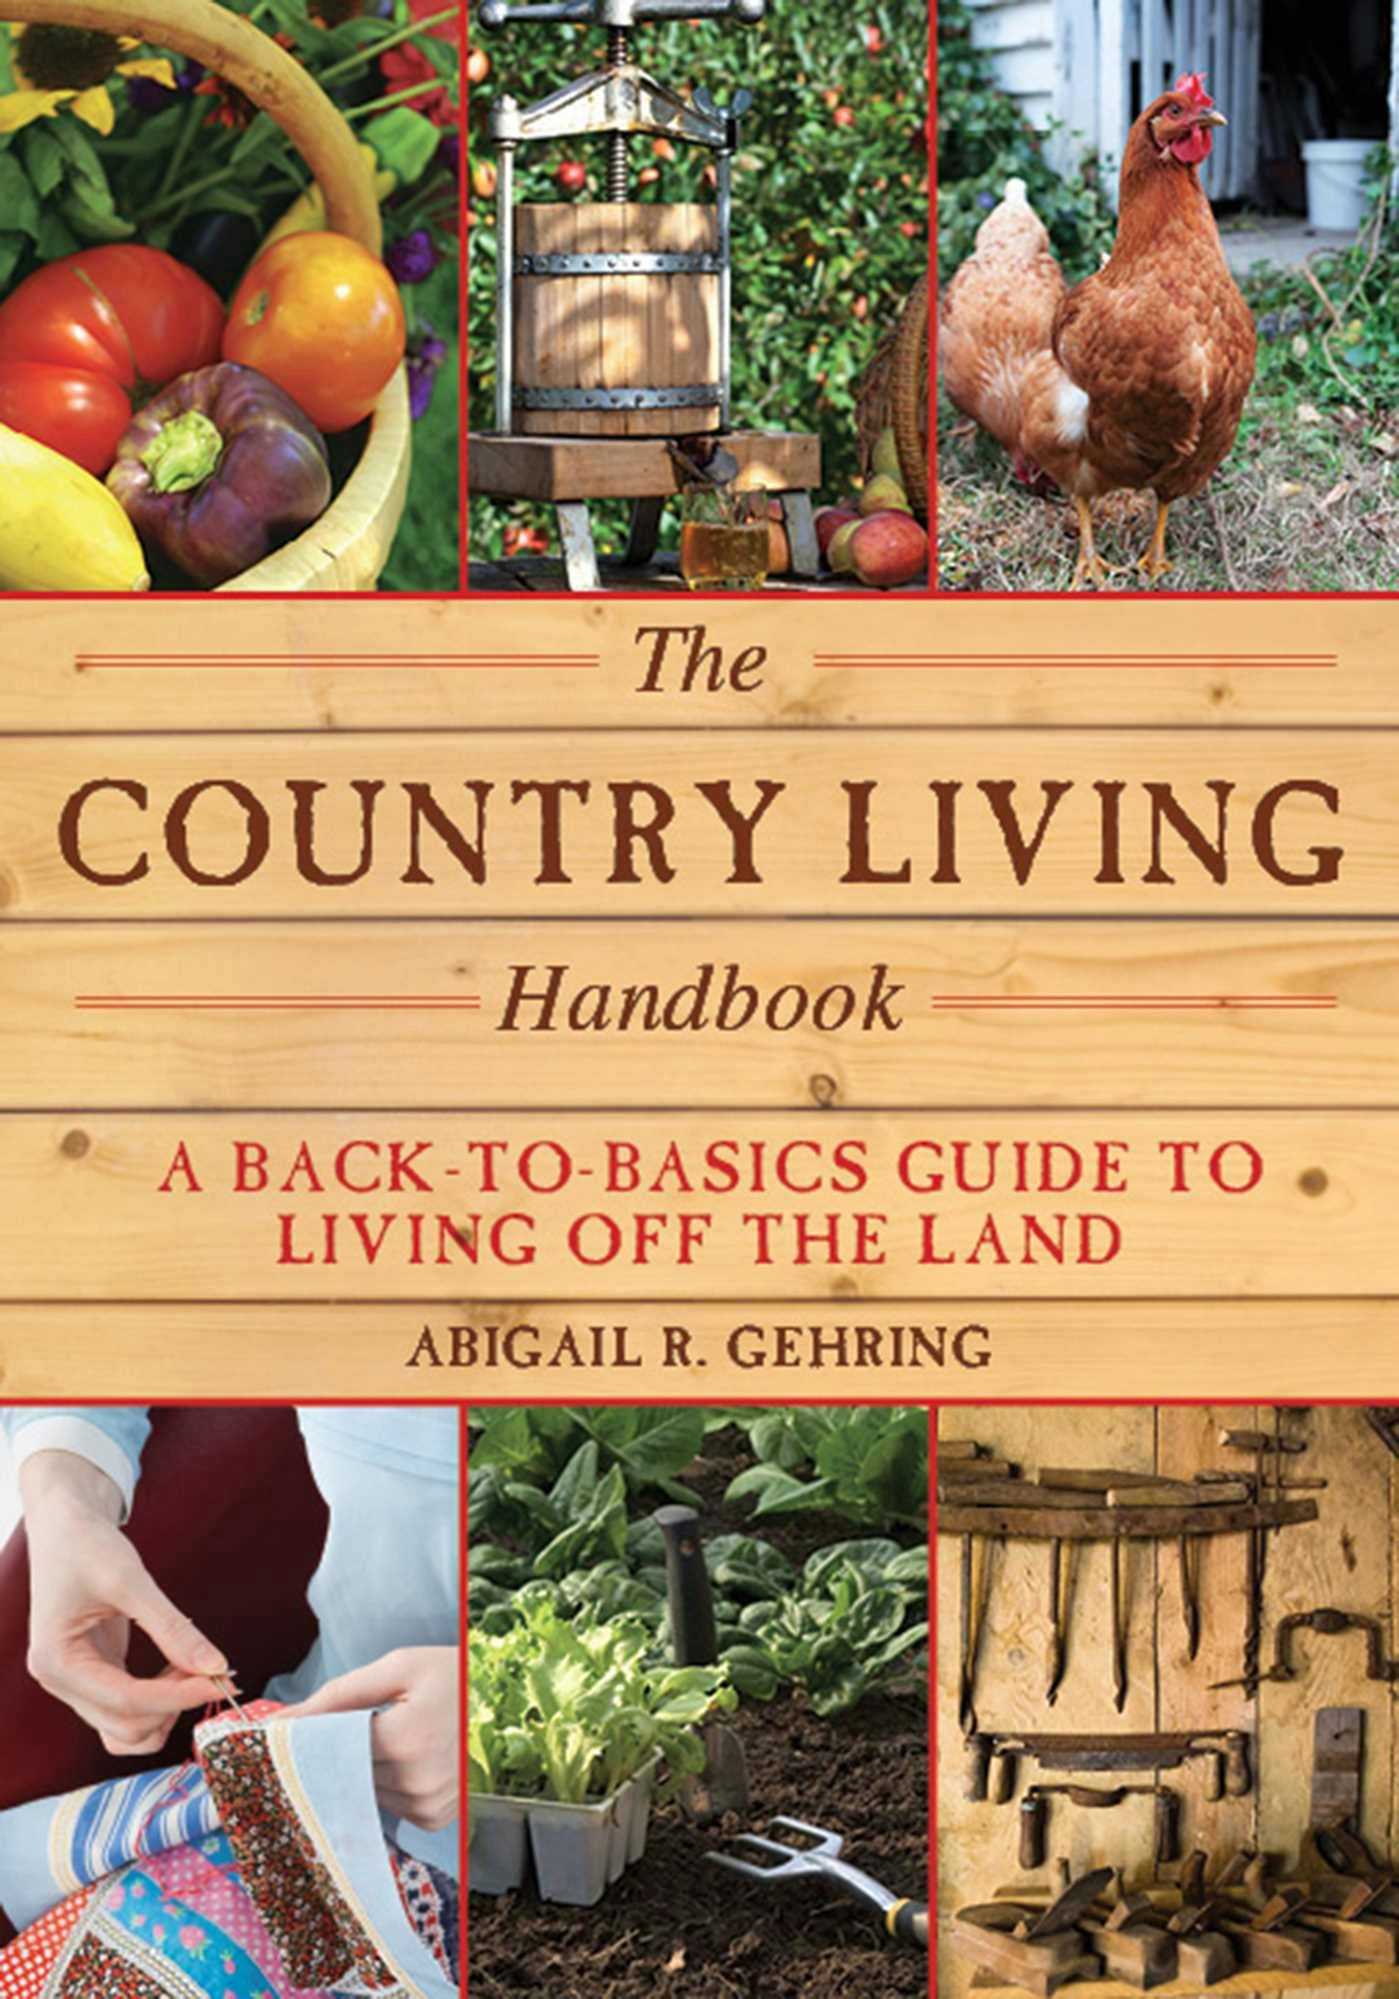 The Country Living Handbook: A Back-to-Basics Guide to Living Off the Land - Abigail Gehring